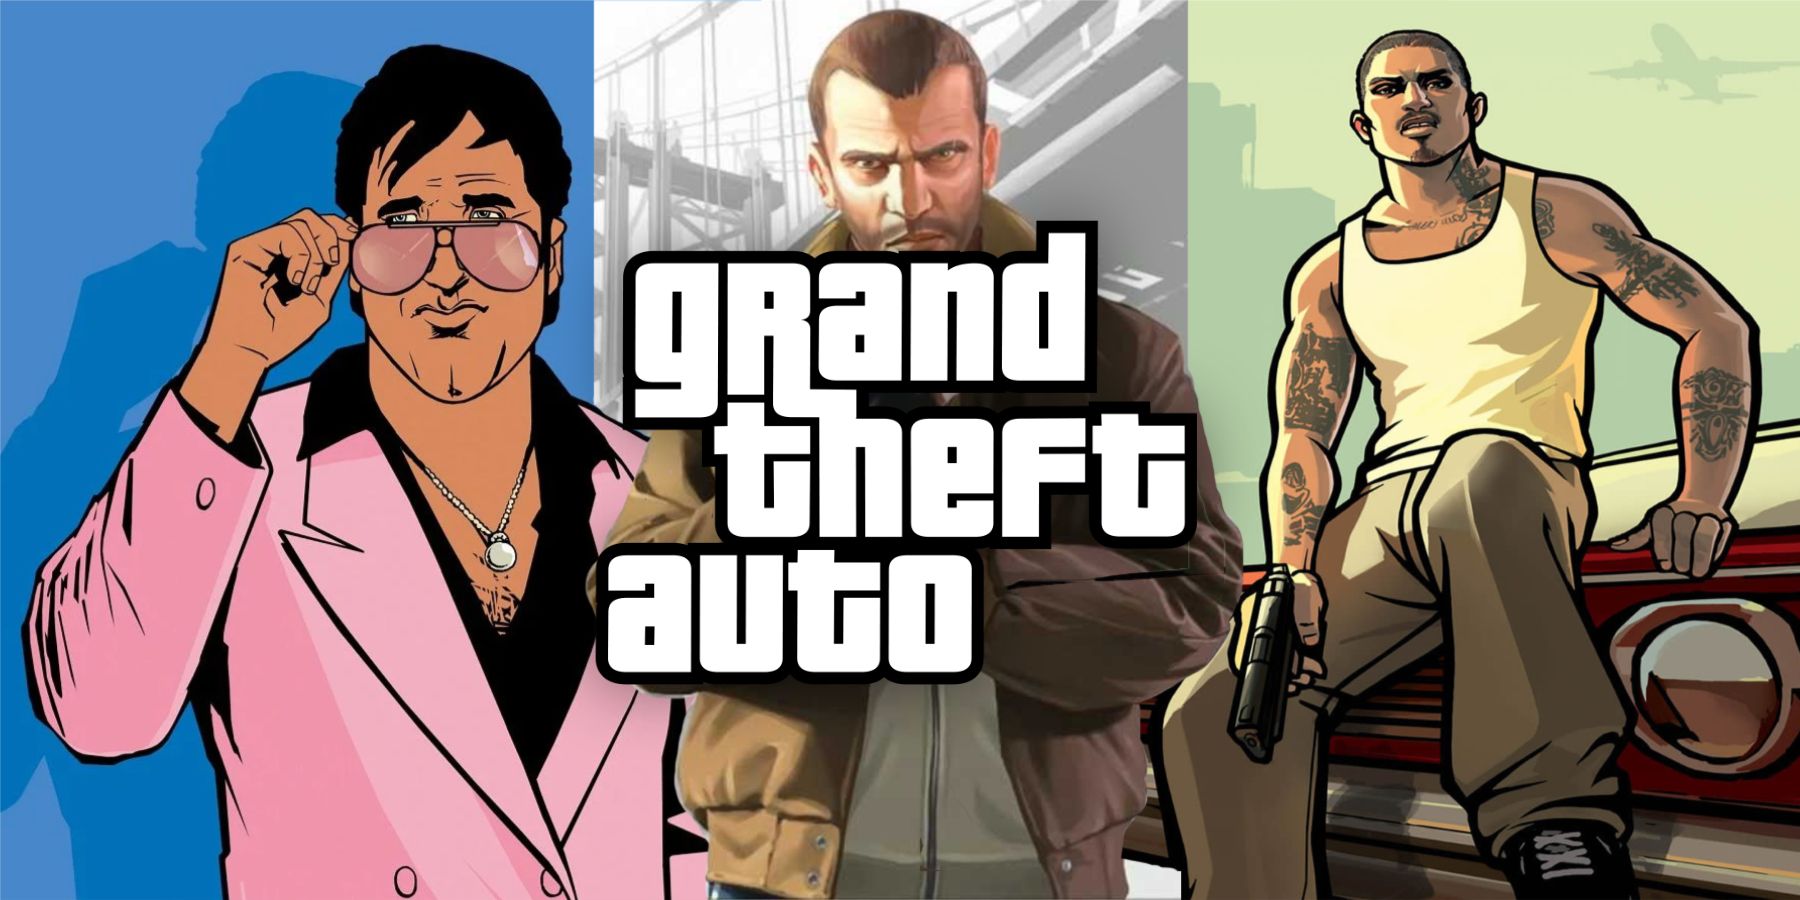 Grand Theft Auto 6: Characters That Need Closure